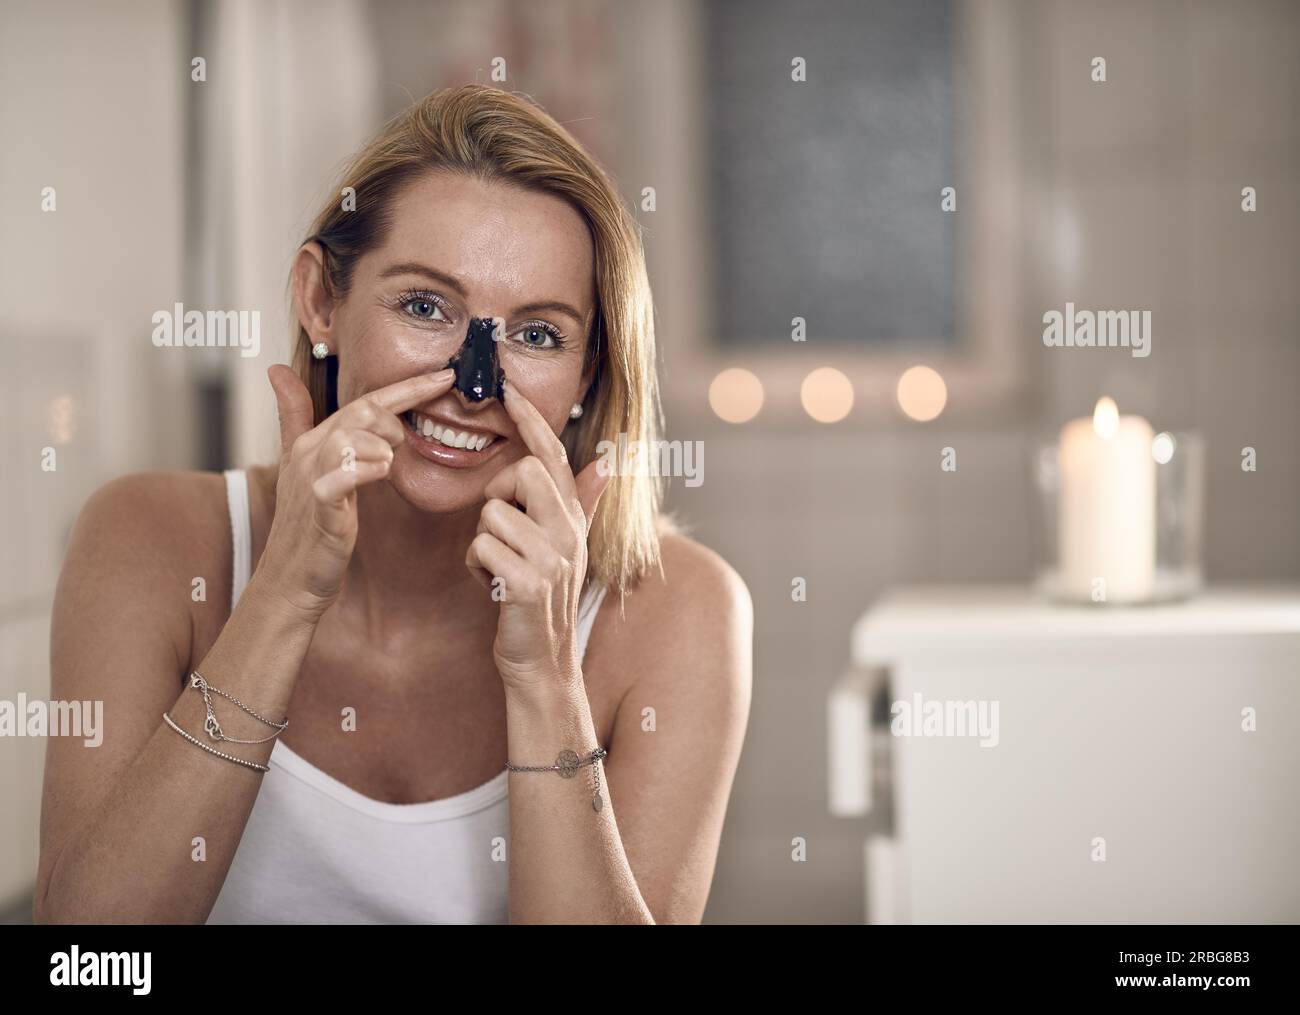 Attractive middle-aged blond woman applying an anti-aging face mask to her nose in a bathroom with burning candles in a concept of beauty, skincare Stock Photo